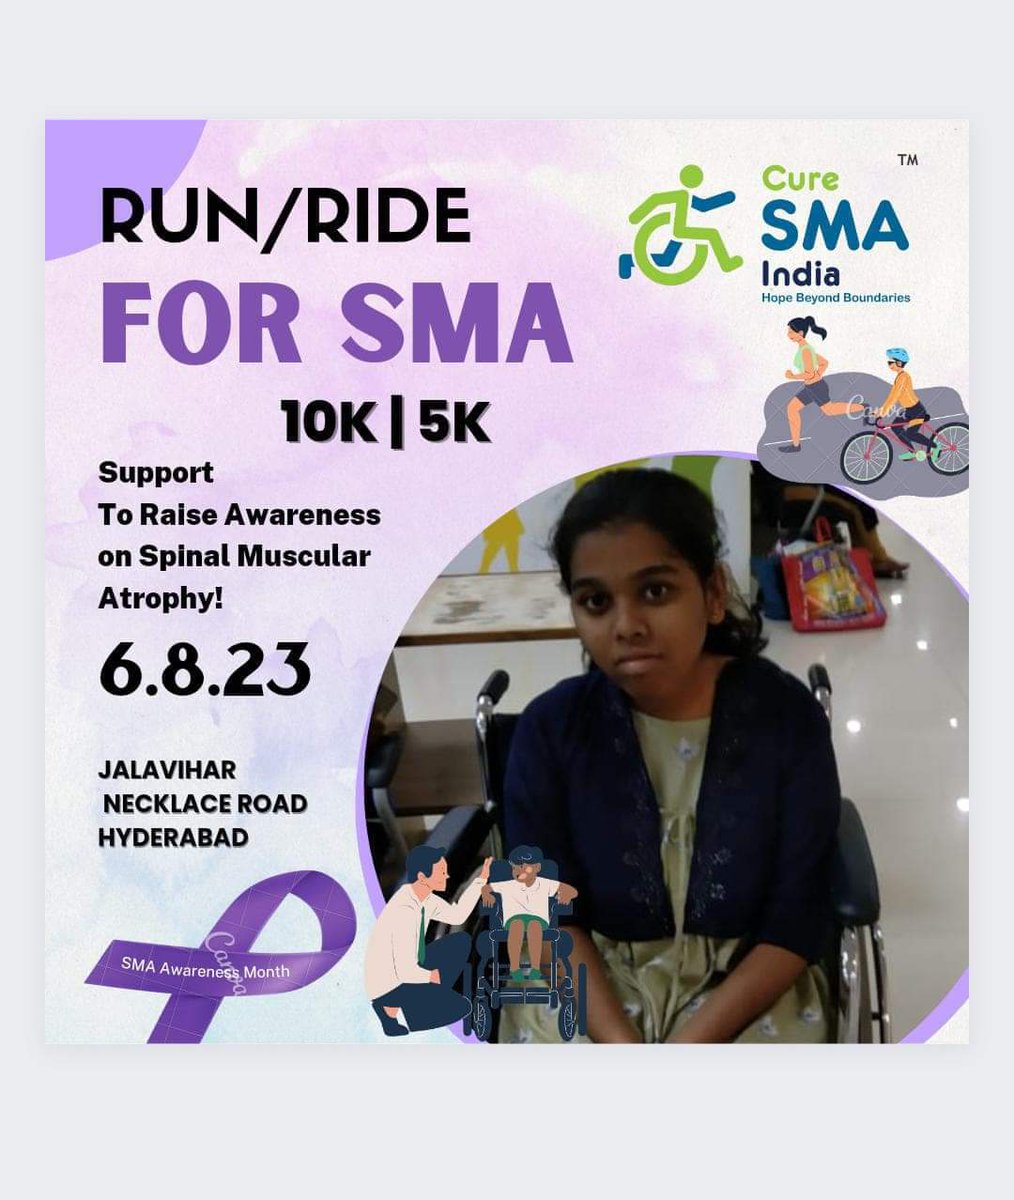 Empathy, understanding and support: the foundation of #SMAawareness join the movement #fightagainstsma #sma #runforsma #supportsmarun #savesmalives